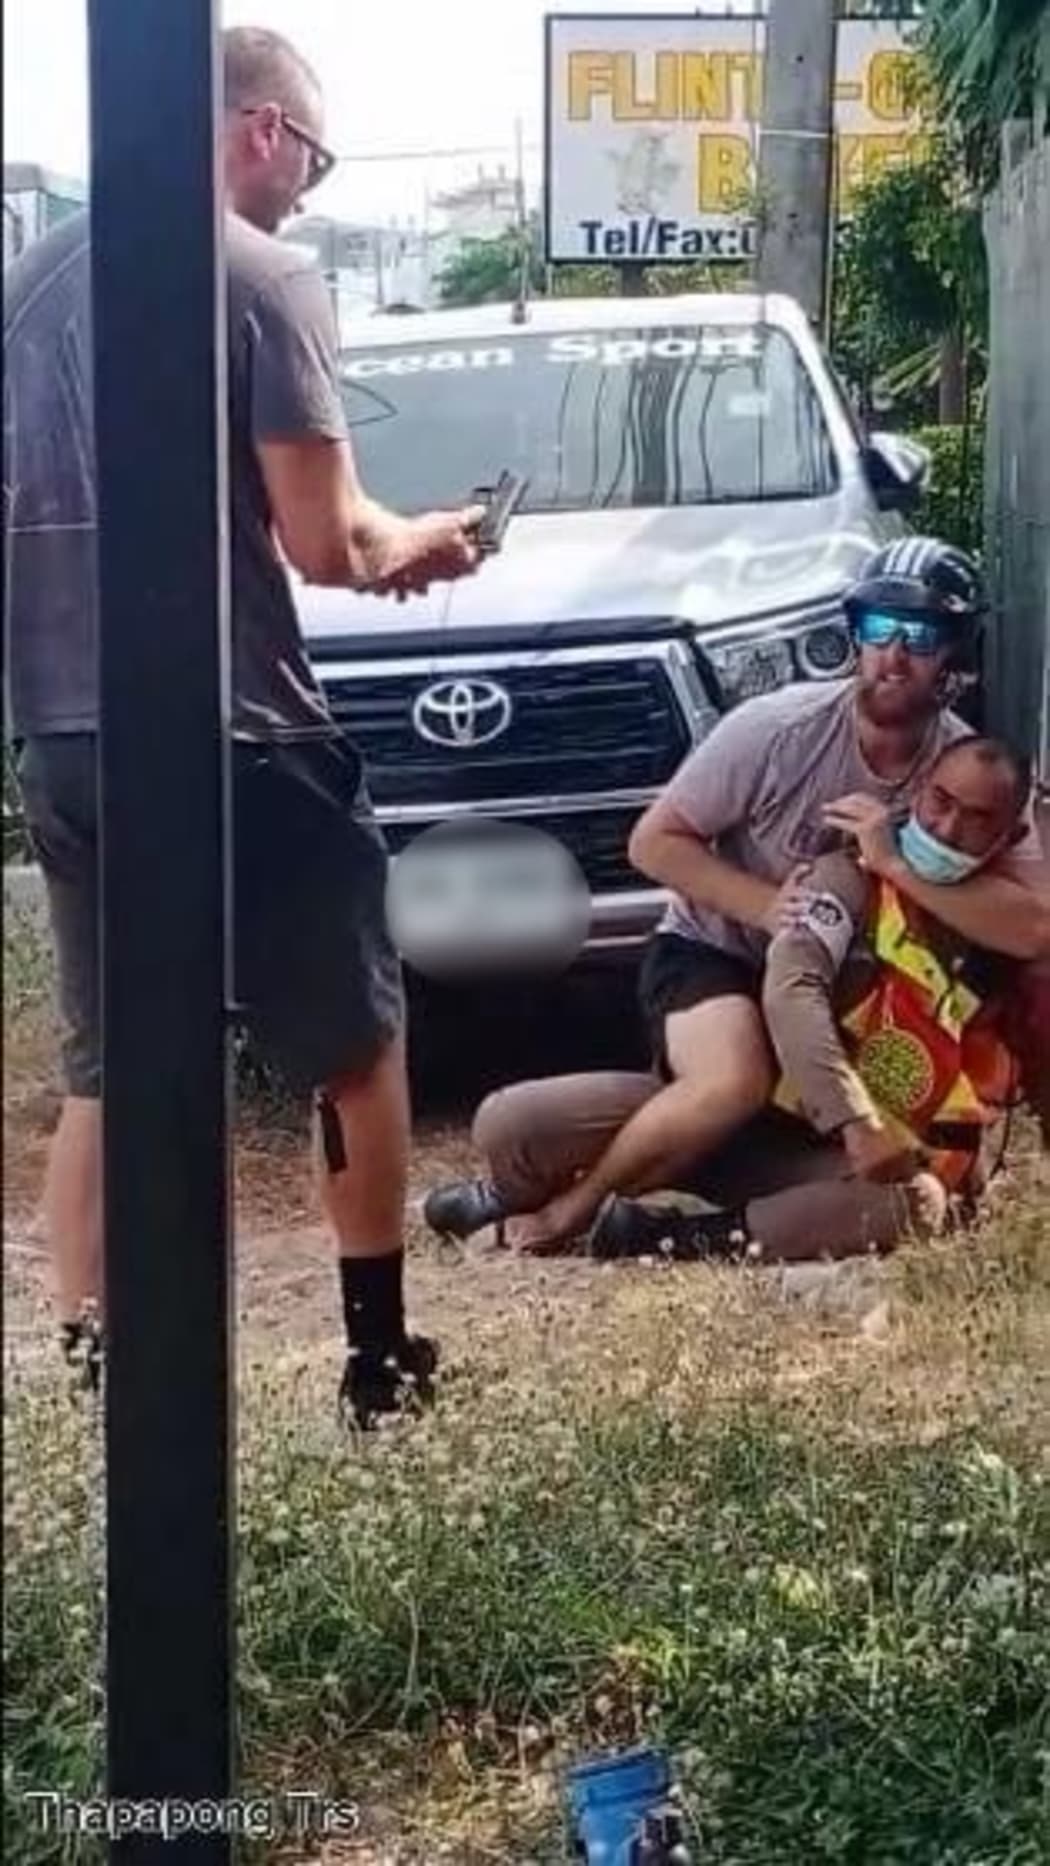 Two New Zealanders have been arrested in Phuket for attacking a police officer Chalong, south of Phuket, media reports say.
Image source: https://www.facebook.com/thapapong.tee/posts/pfbid0NfEucn3o4A3gASYwCQWtVYuNcMSc2xZzf5xxnsZmYkfz8h2BAZqAHEB7LbmLgtw2l